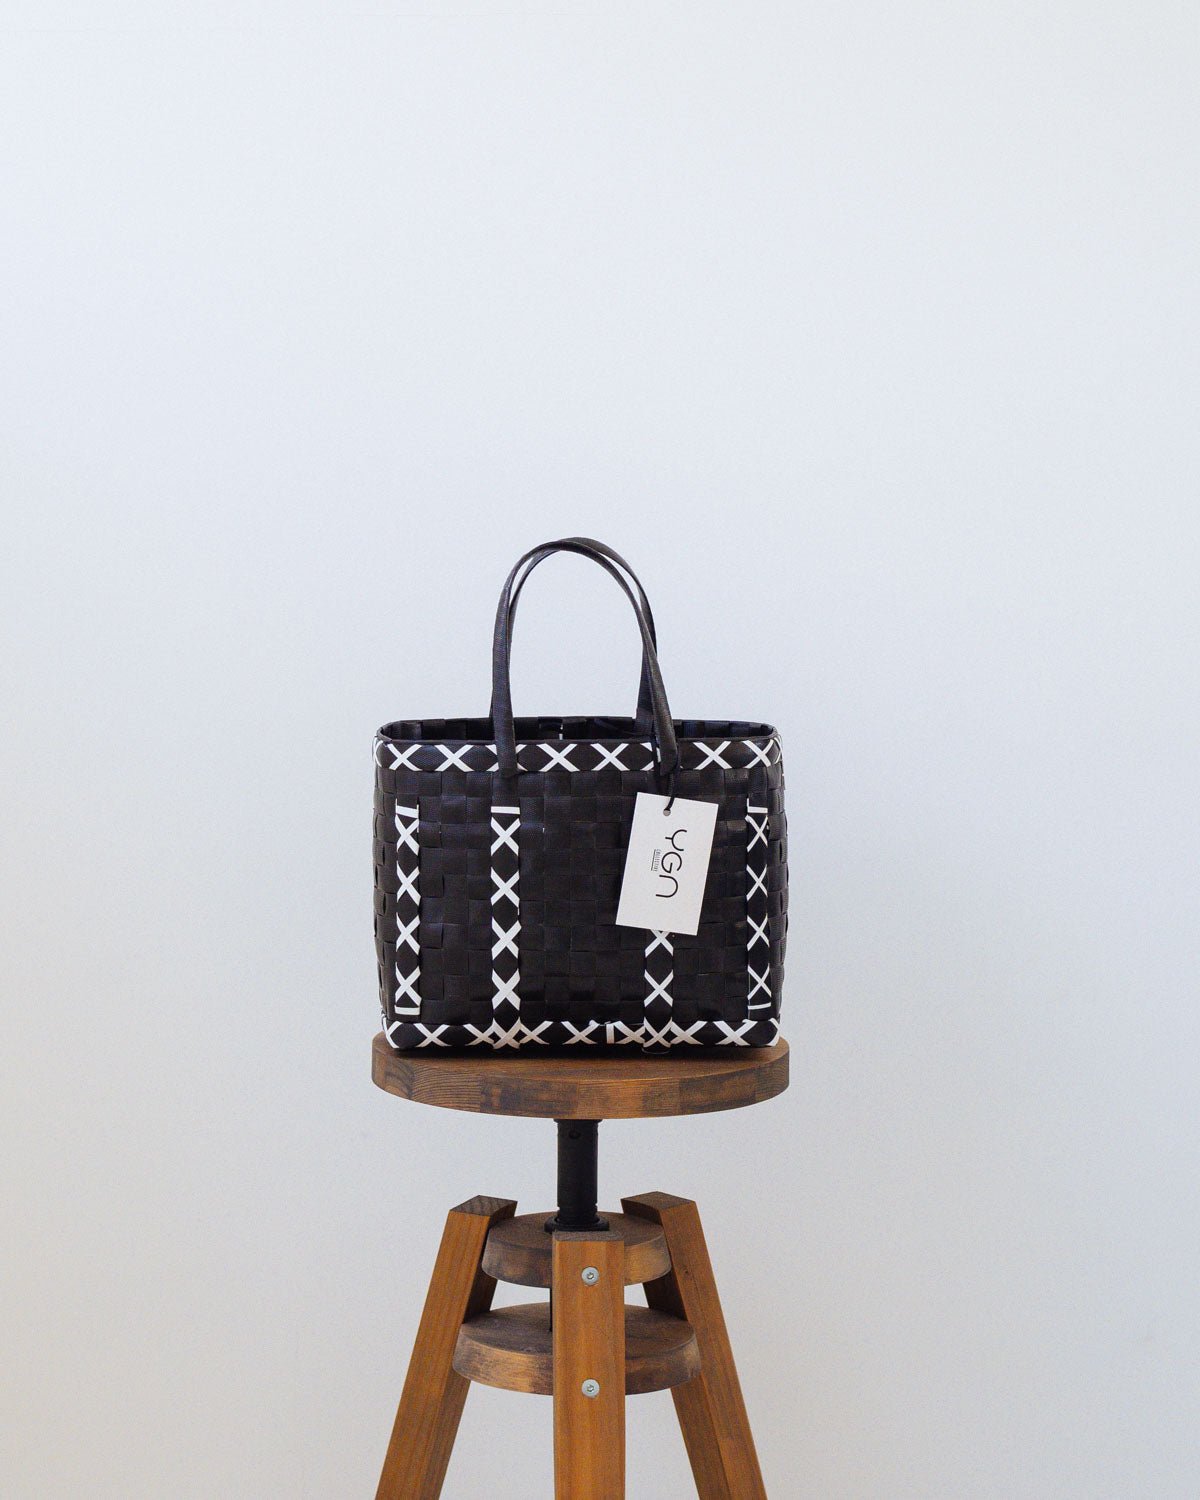 Black with White Stitch Woven Upcycled Basket | Shopper Bag | Beach Basket - YGN Collective